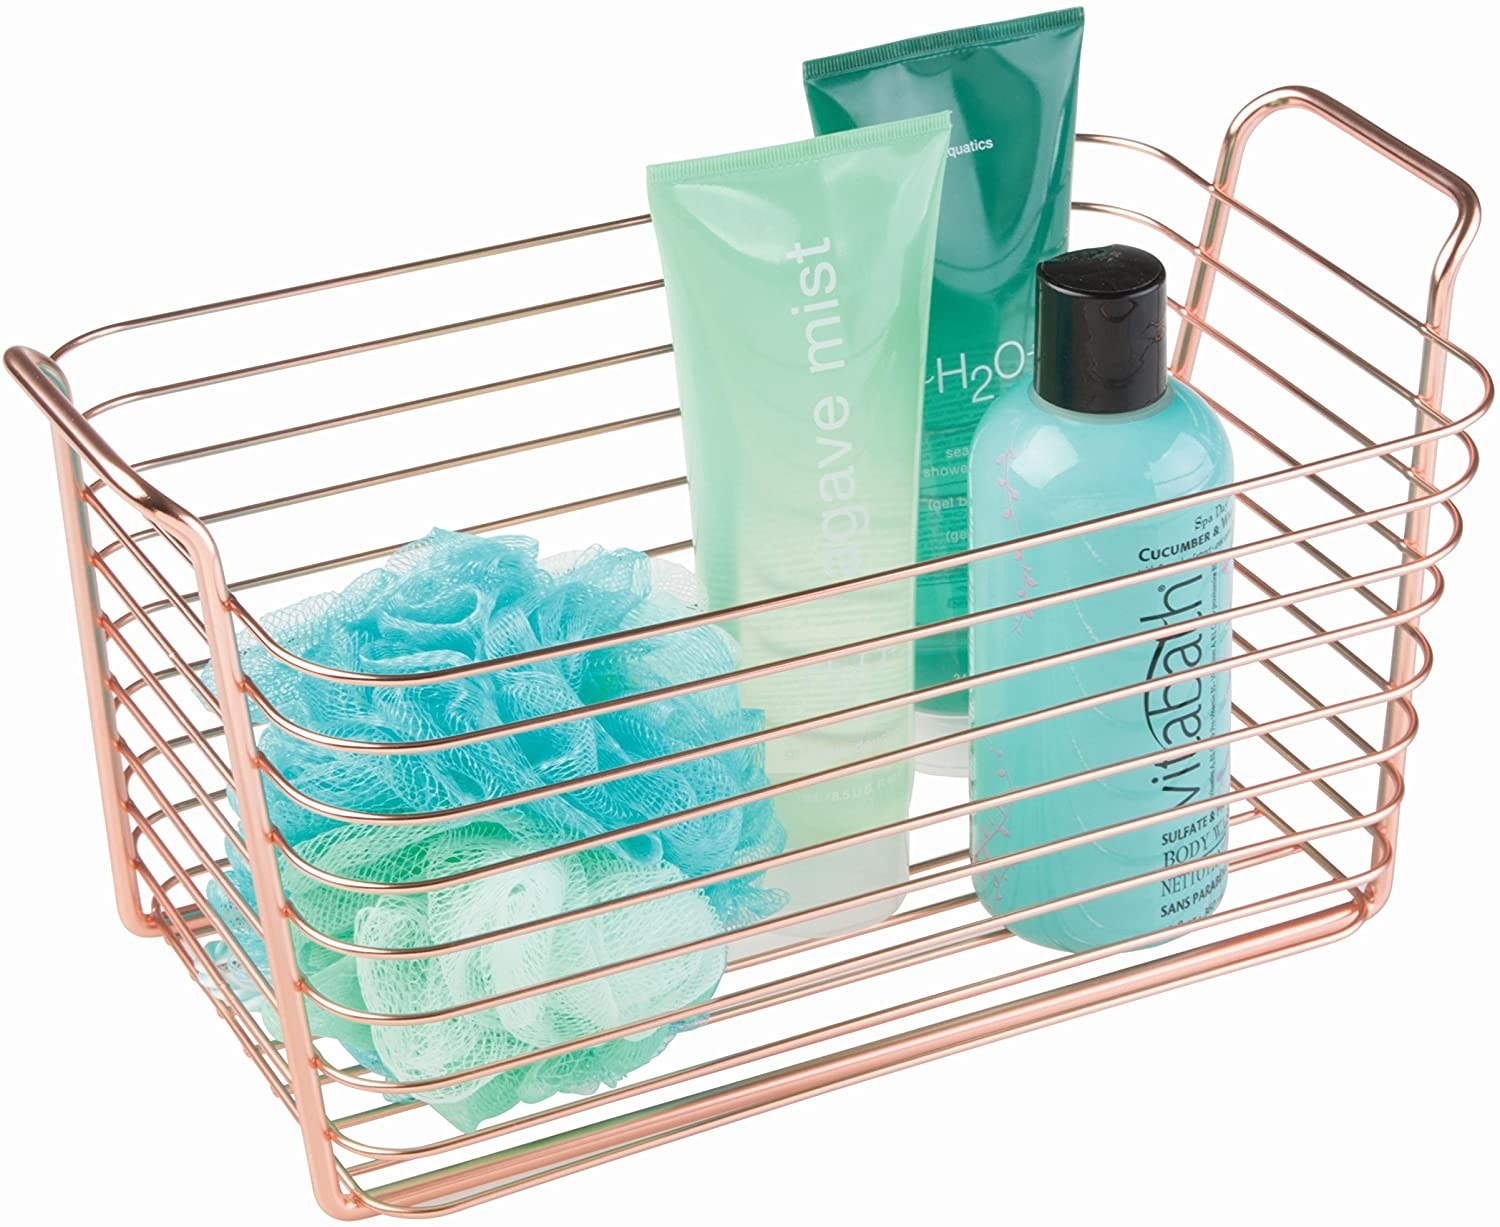 The wire basket with loofahs and toiletries in it.